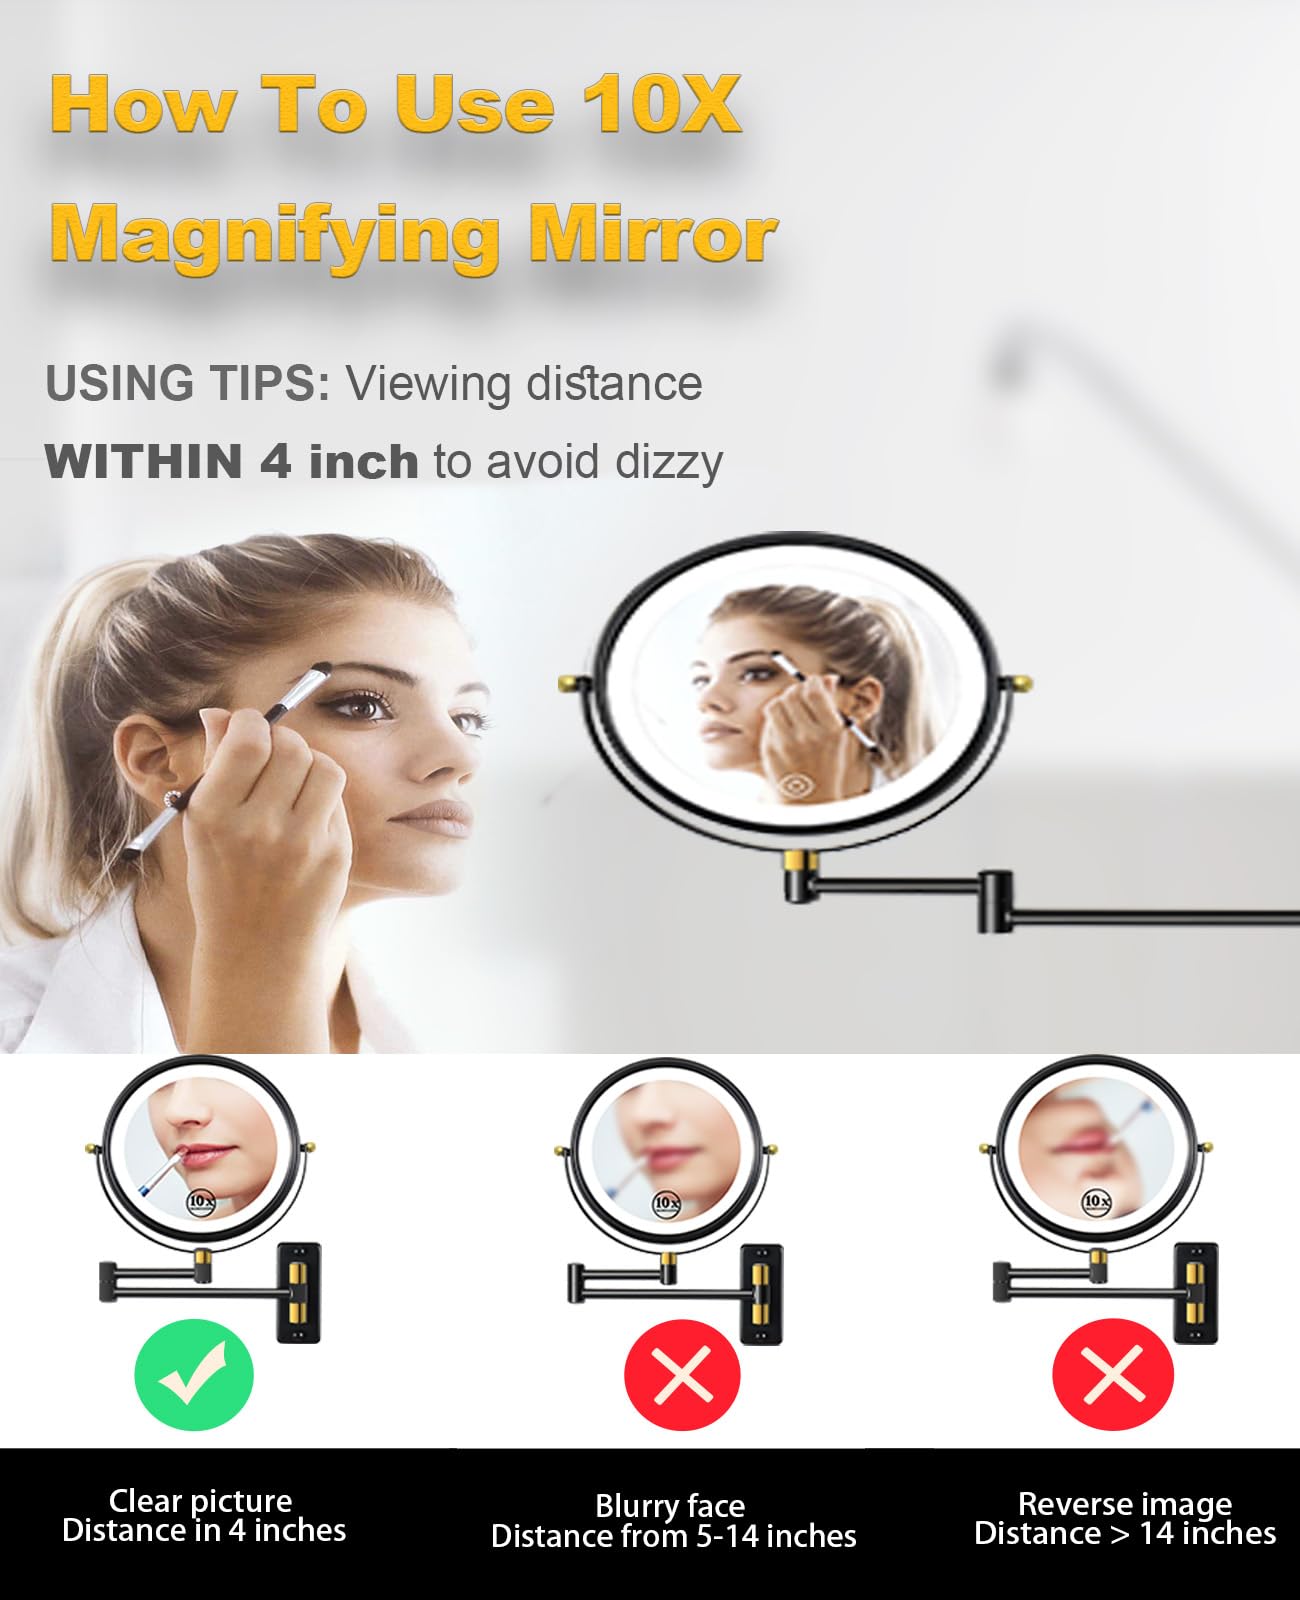 Vitoki 9" Wall Mounted Magnifying Mirror with Lights,3 Modes Dimmable 1X/10X Double Sides Lighted Makeup Mirror Wall Mounted,USB-C Rechargeable 360° Rotation Vanity Mirror with Lights for Bathroom